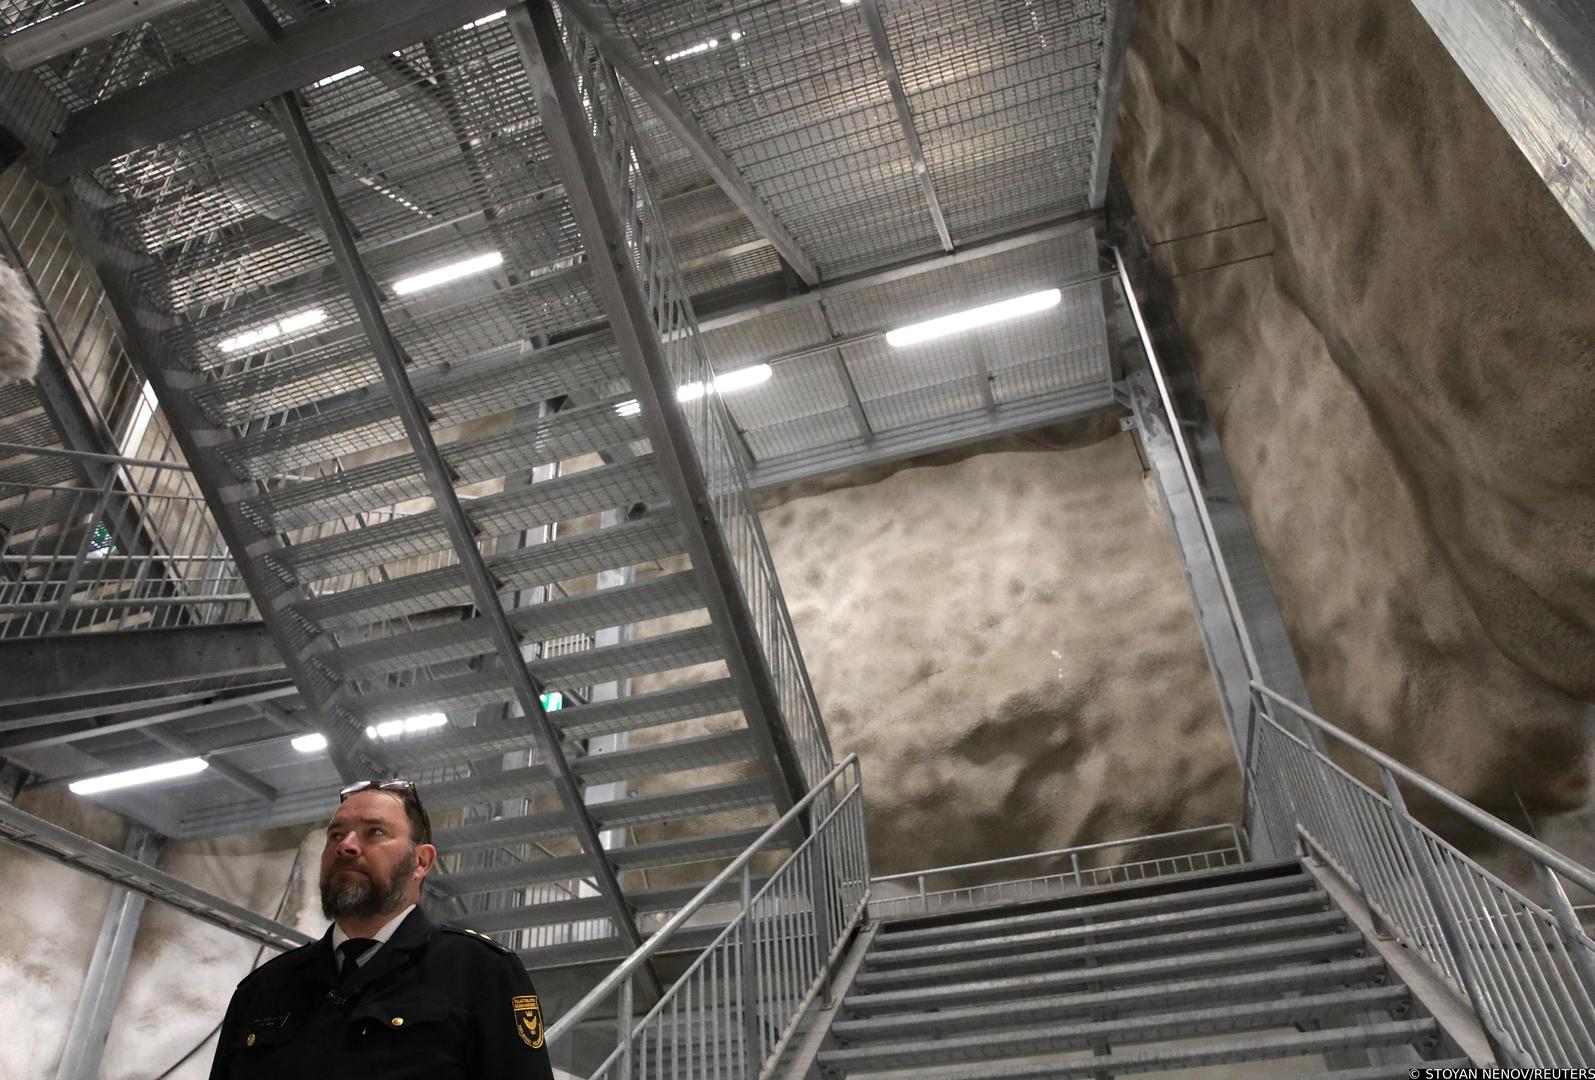 Tomi Rask, emergency planning officer at the Helsinki rescue department is pictured at a civil defence underground shelter, used also as a sports hall, in Helsinki, Finland, May 25, 2022. REUTERS/Stoyan Nenov Photo: STOYAN NENOV/REUTERS